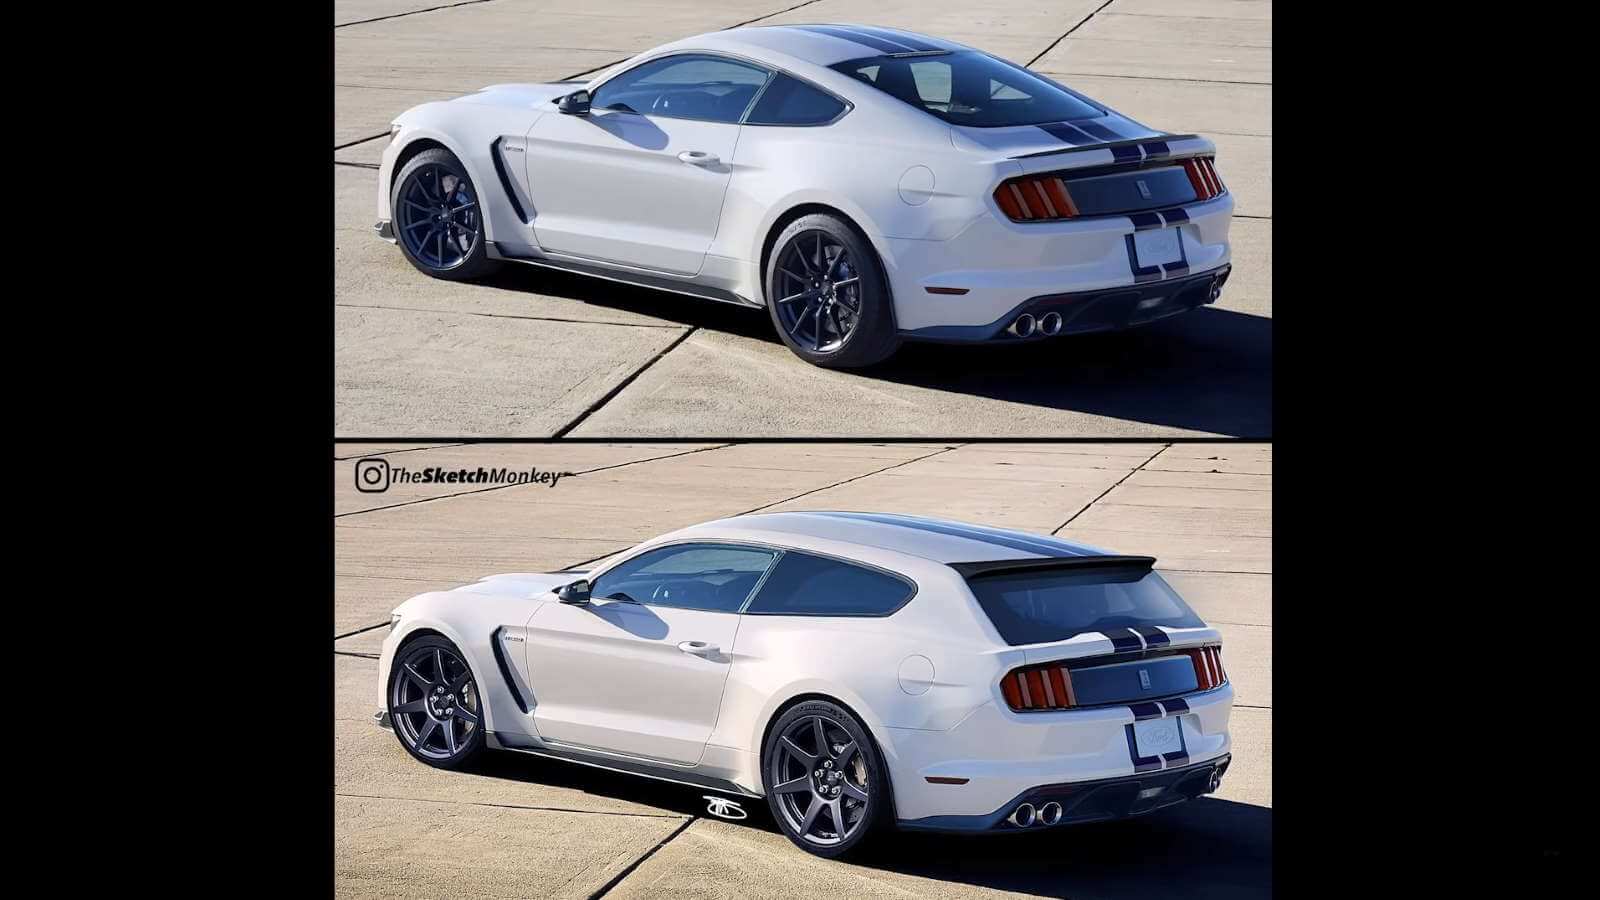 Ford Mustang Shelby GT350 Shooting Break